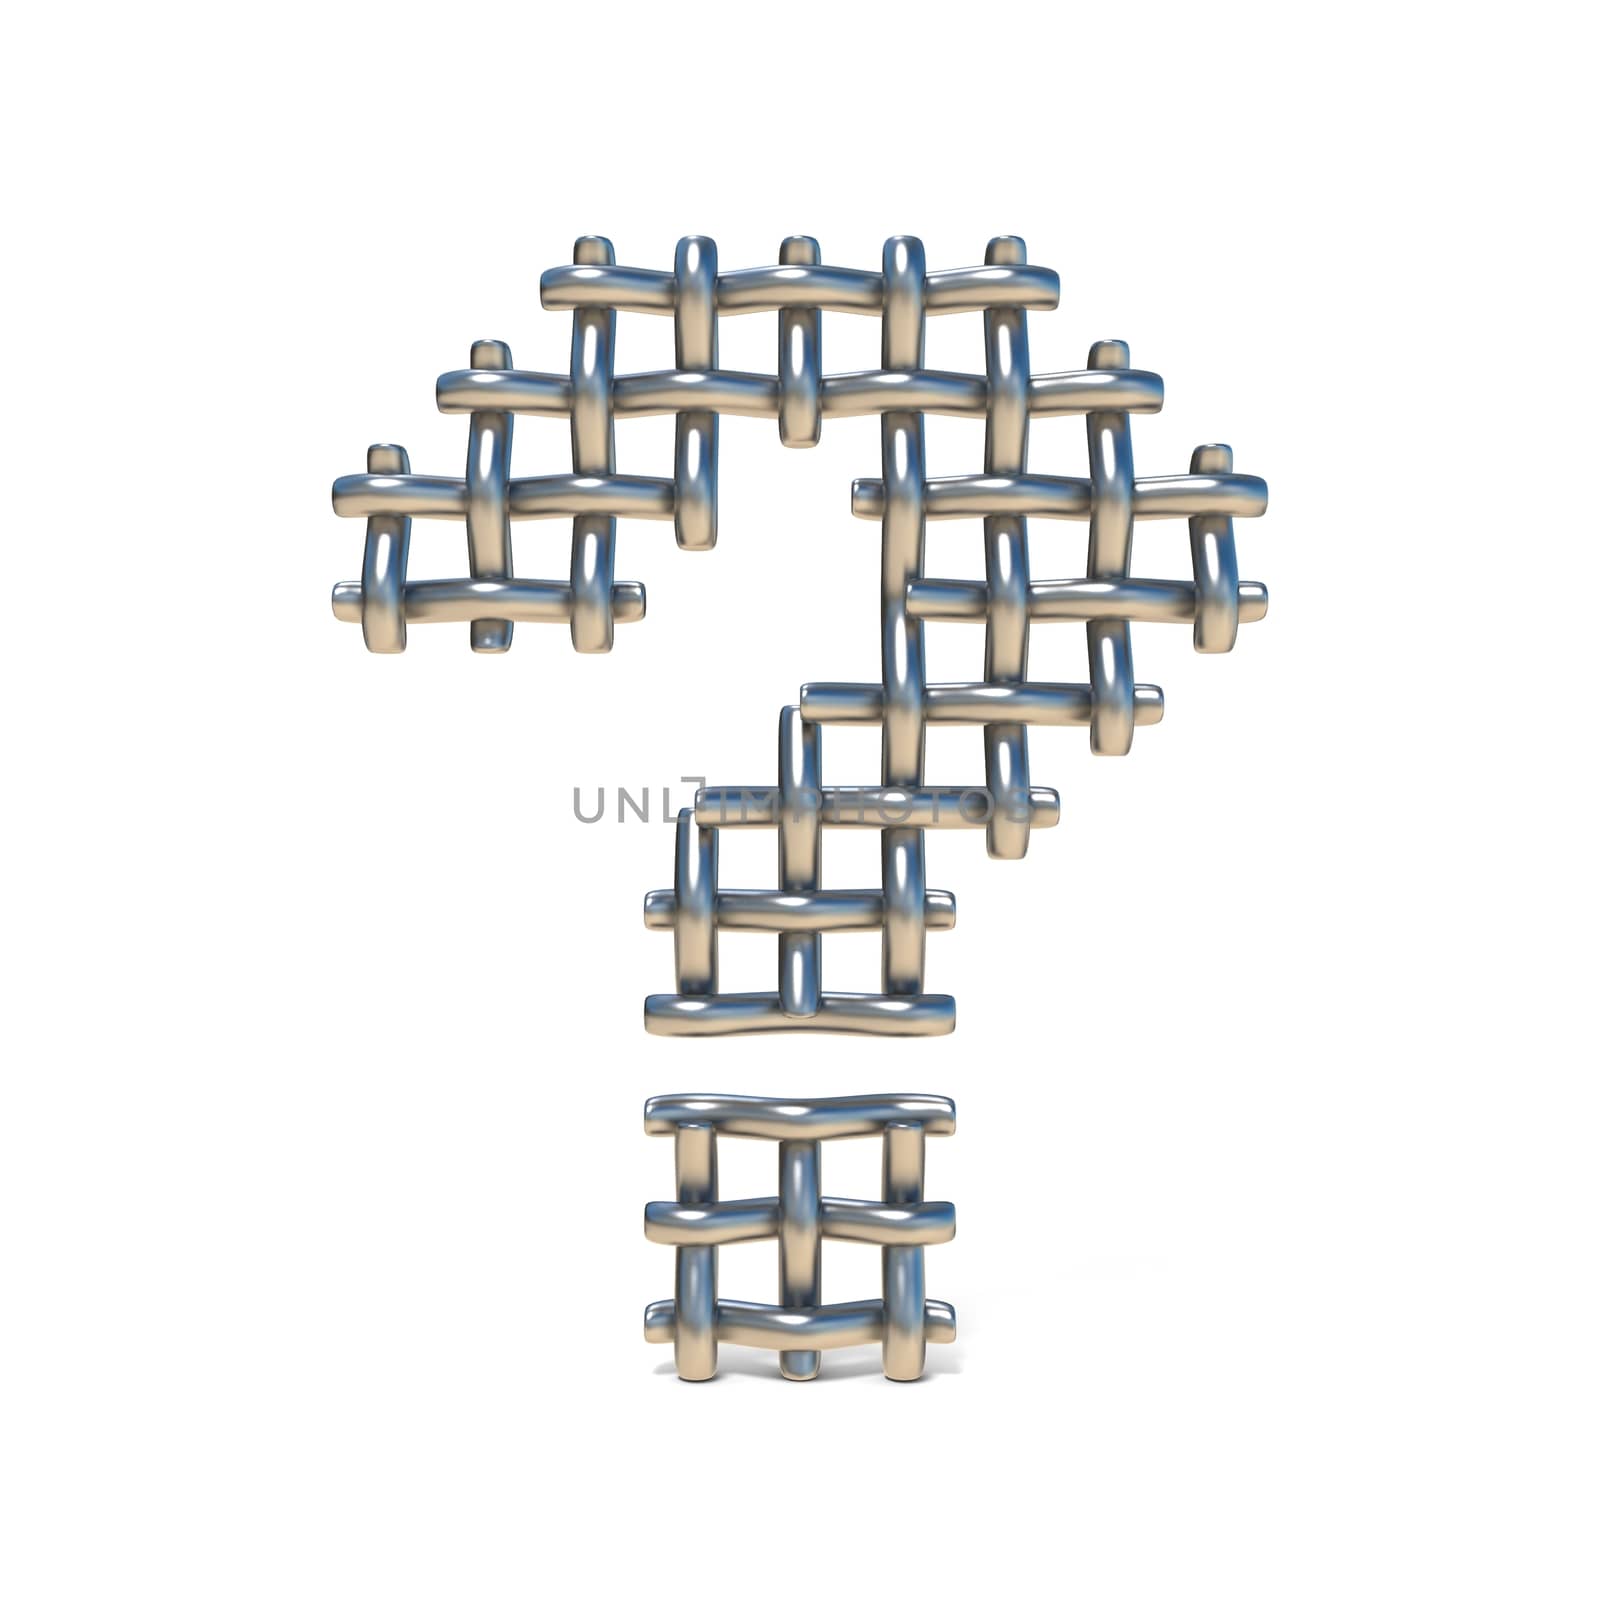 Metal wire mesh font QUESTION MARK 3D by djmilic